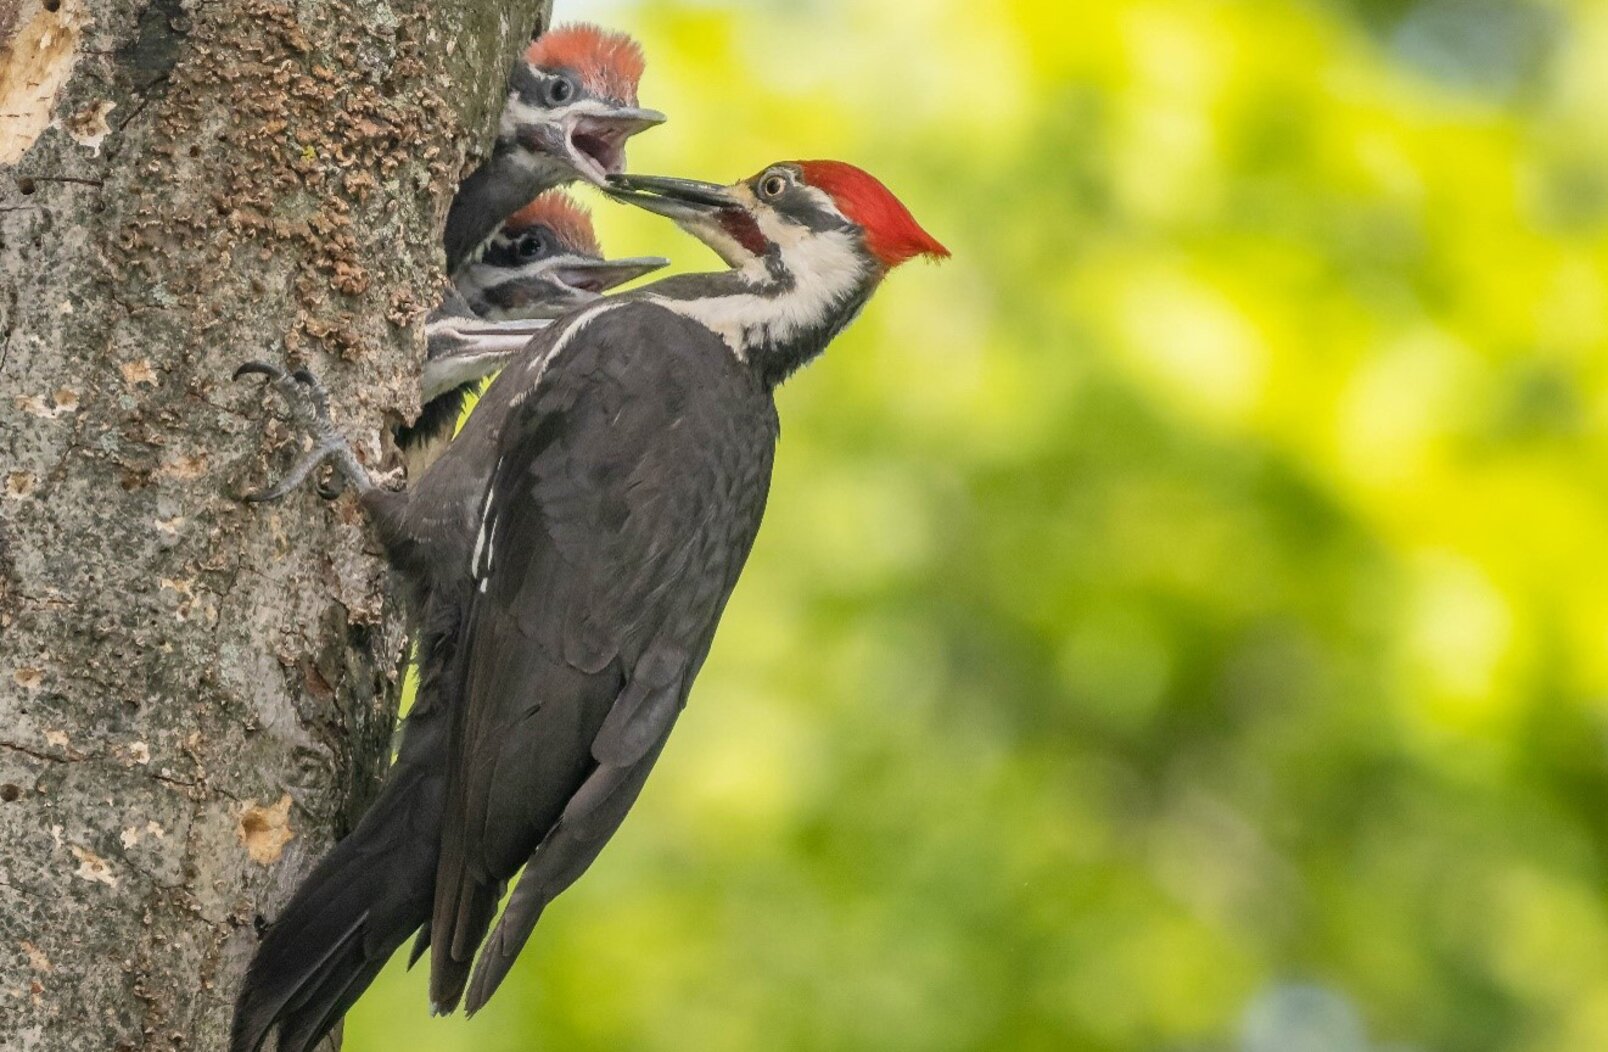 In 2020, Pileated Woodpeckers, long absent as a breeding species in New York City, were recorded nesting on Staten Island by citizen scientist volunteers for New York Breeding Bird Atlas III. Photo: Lawrence Pugliares